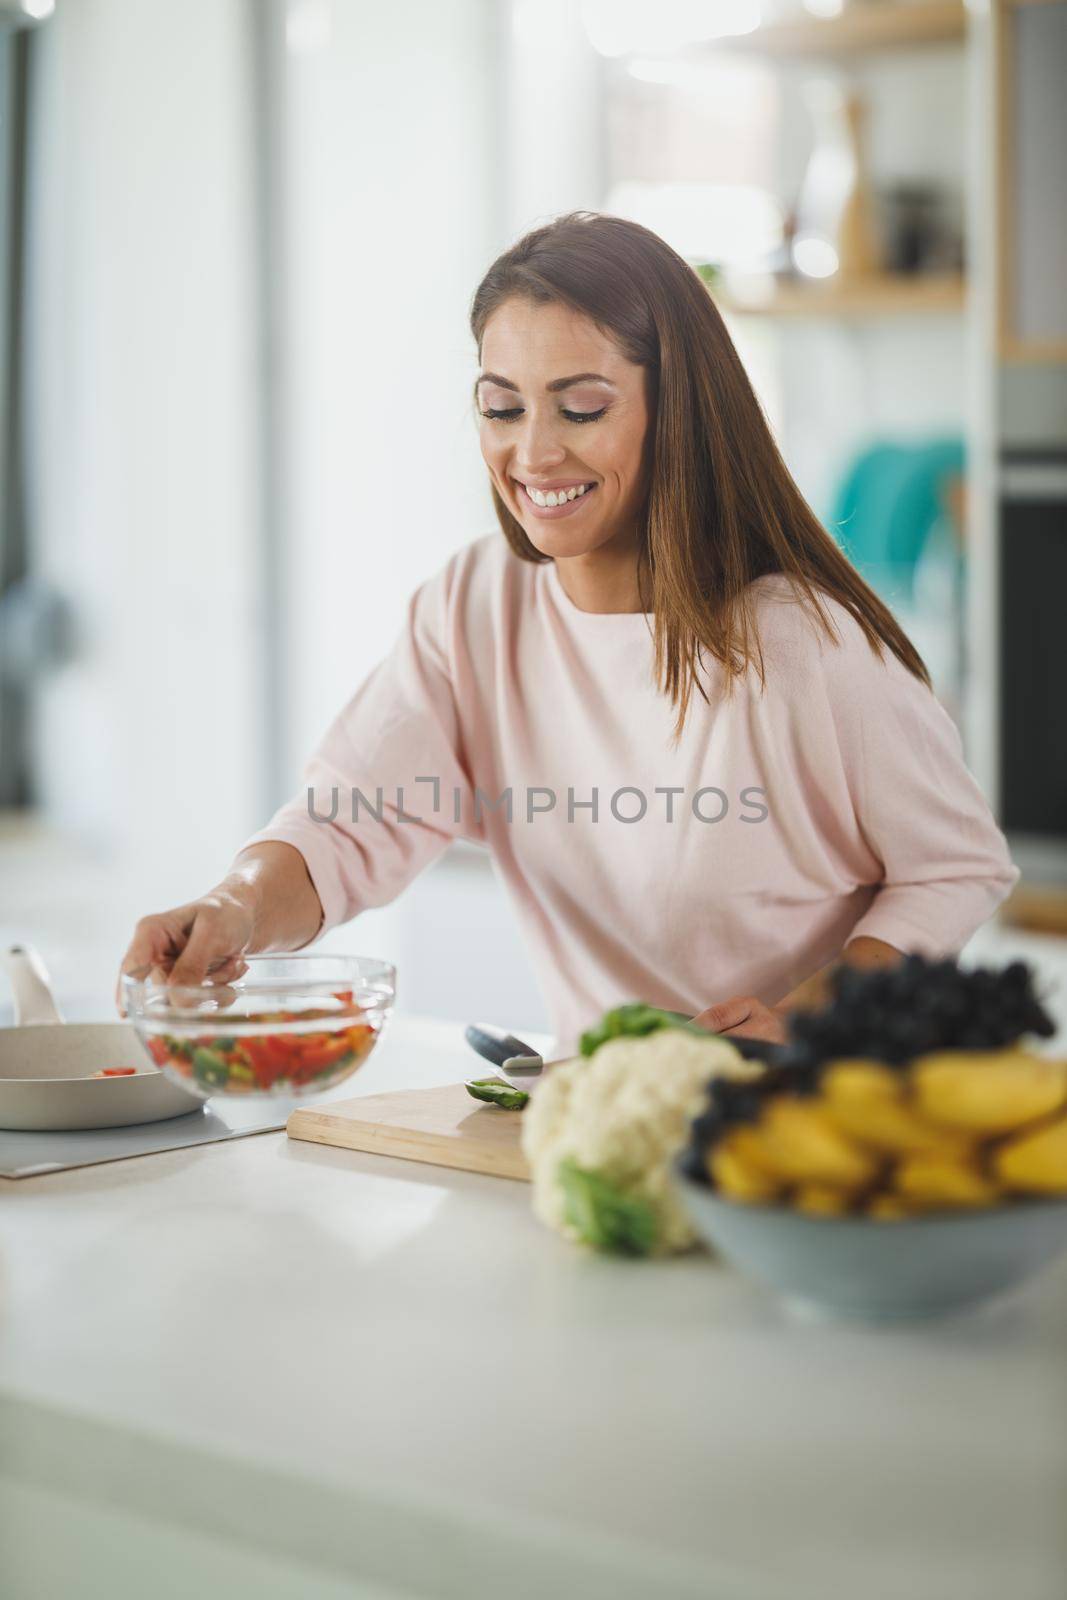 Shot of a young woman preparing a healthy meal in her kitchen.